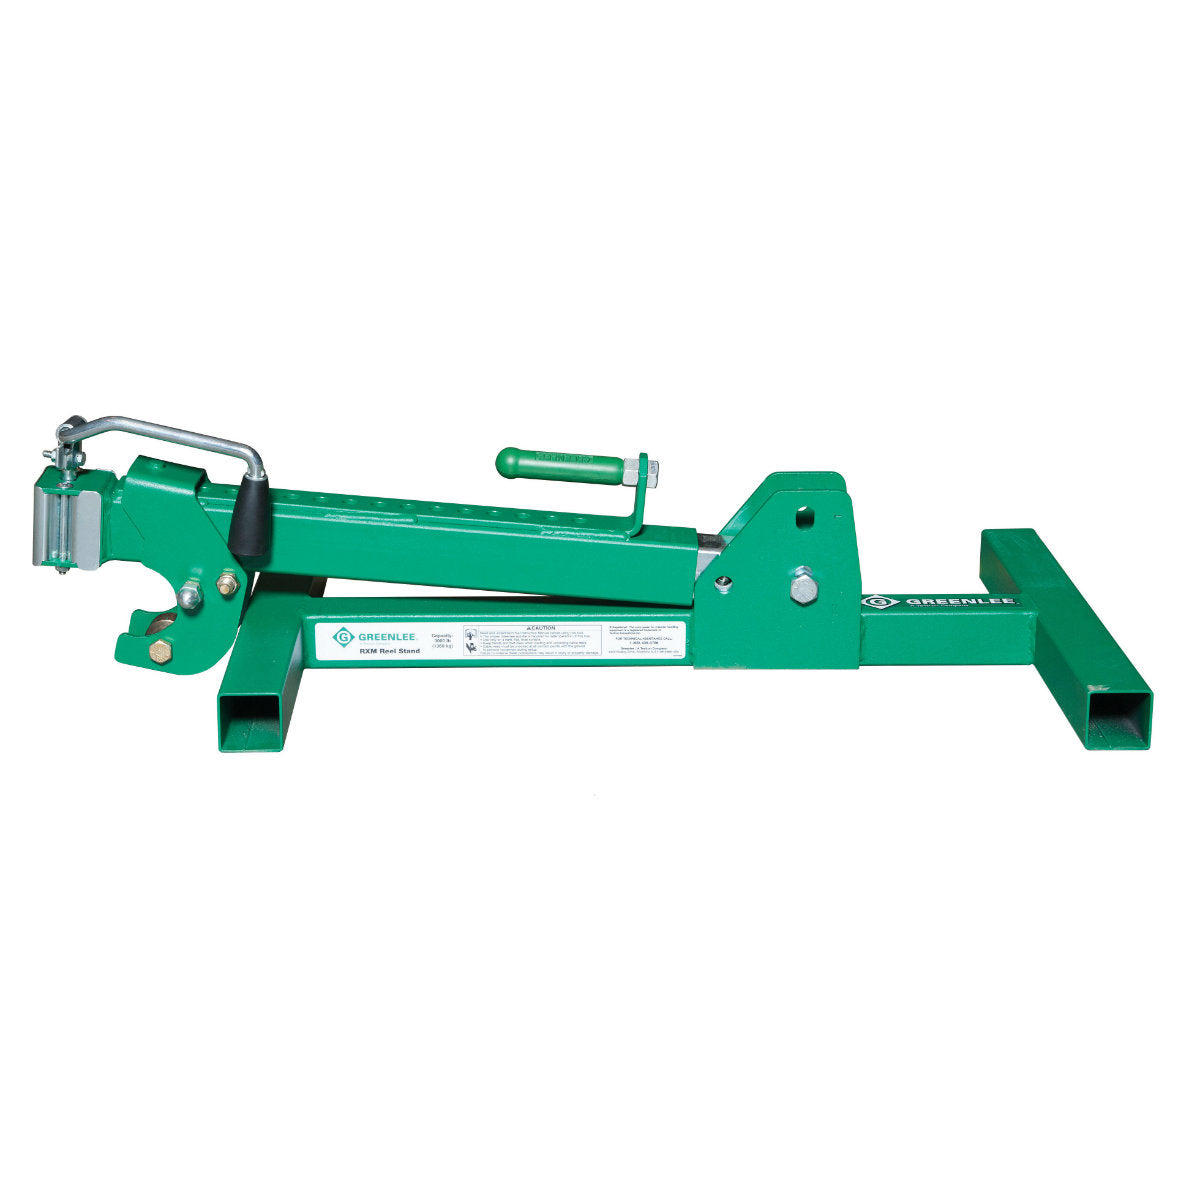 Greenlee 684 Spindle for 683 Reel Stand